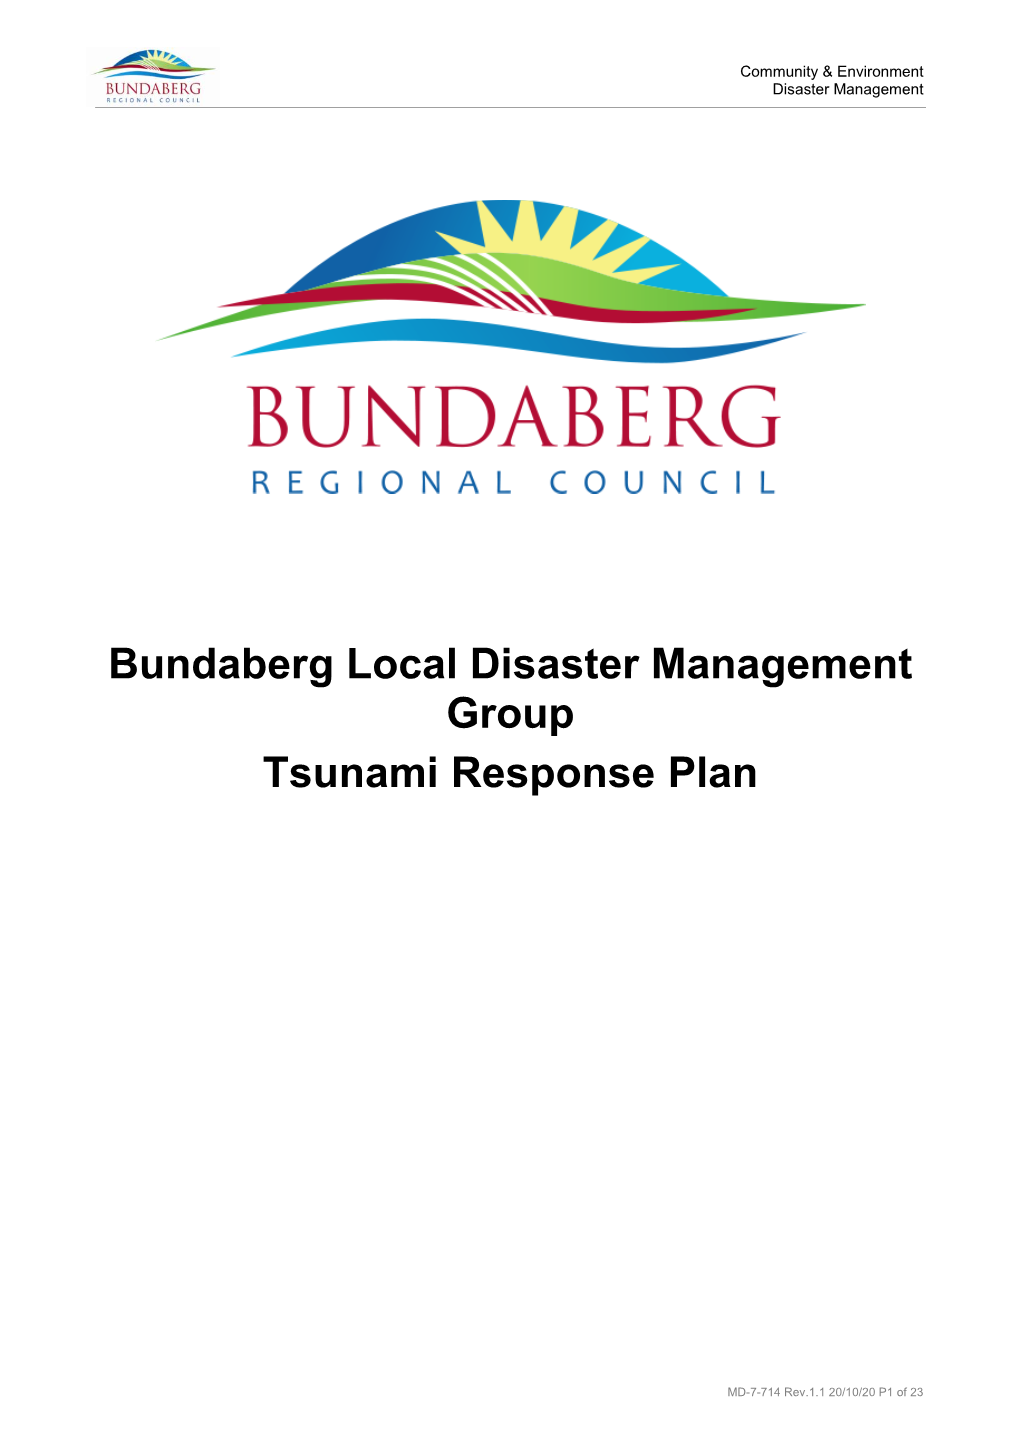 Queensland Disaster Management Arrangement Stakeholders (Including Ldmgs) by SMS, Telephone and Email